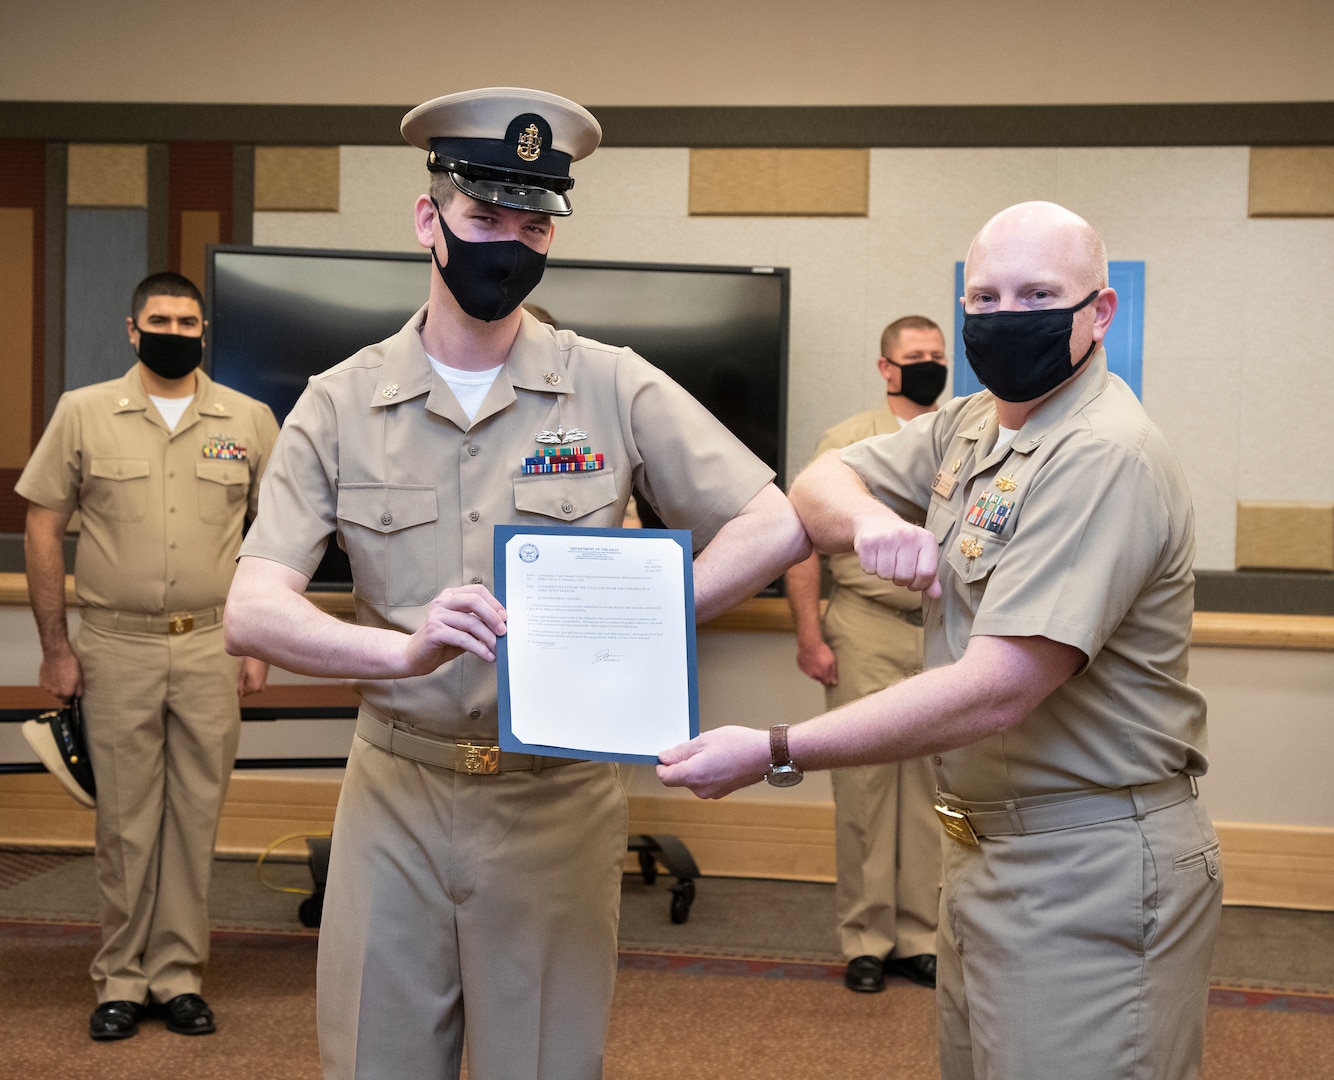 Capt. Jip Mosman, commander, Puget Sound Naval Shipyard & Intermediate Maintenance Facility, presents newly-pinned Chief Petty Officer Devin Donohue with his promotion orders during a during a ceremony Jan. 29, 2021, at Olympic Lodge on Naval Base Kitsap-Bremerton, Washington. The ceremony had limited attendees, with participants and attendees socially distanced to adhere to COVID-19 protective protocols.